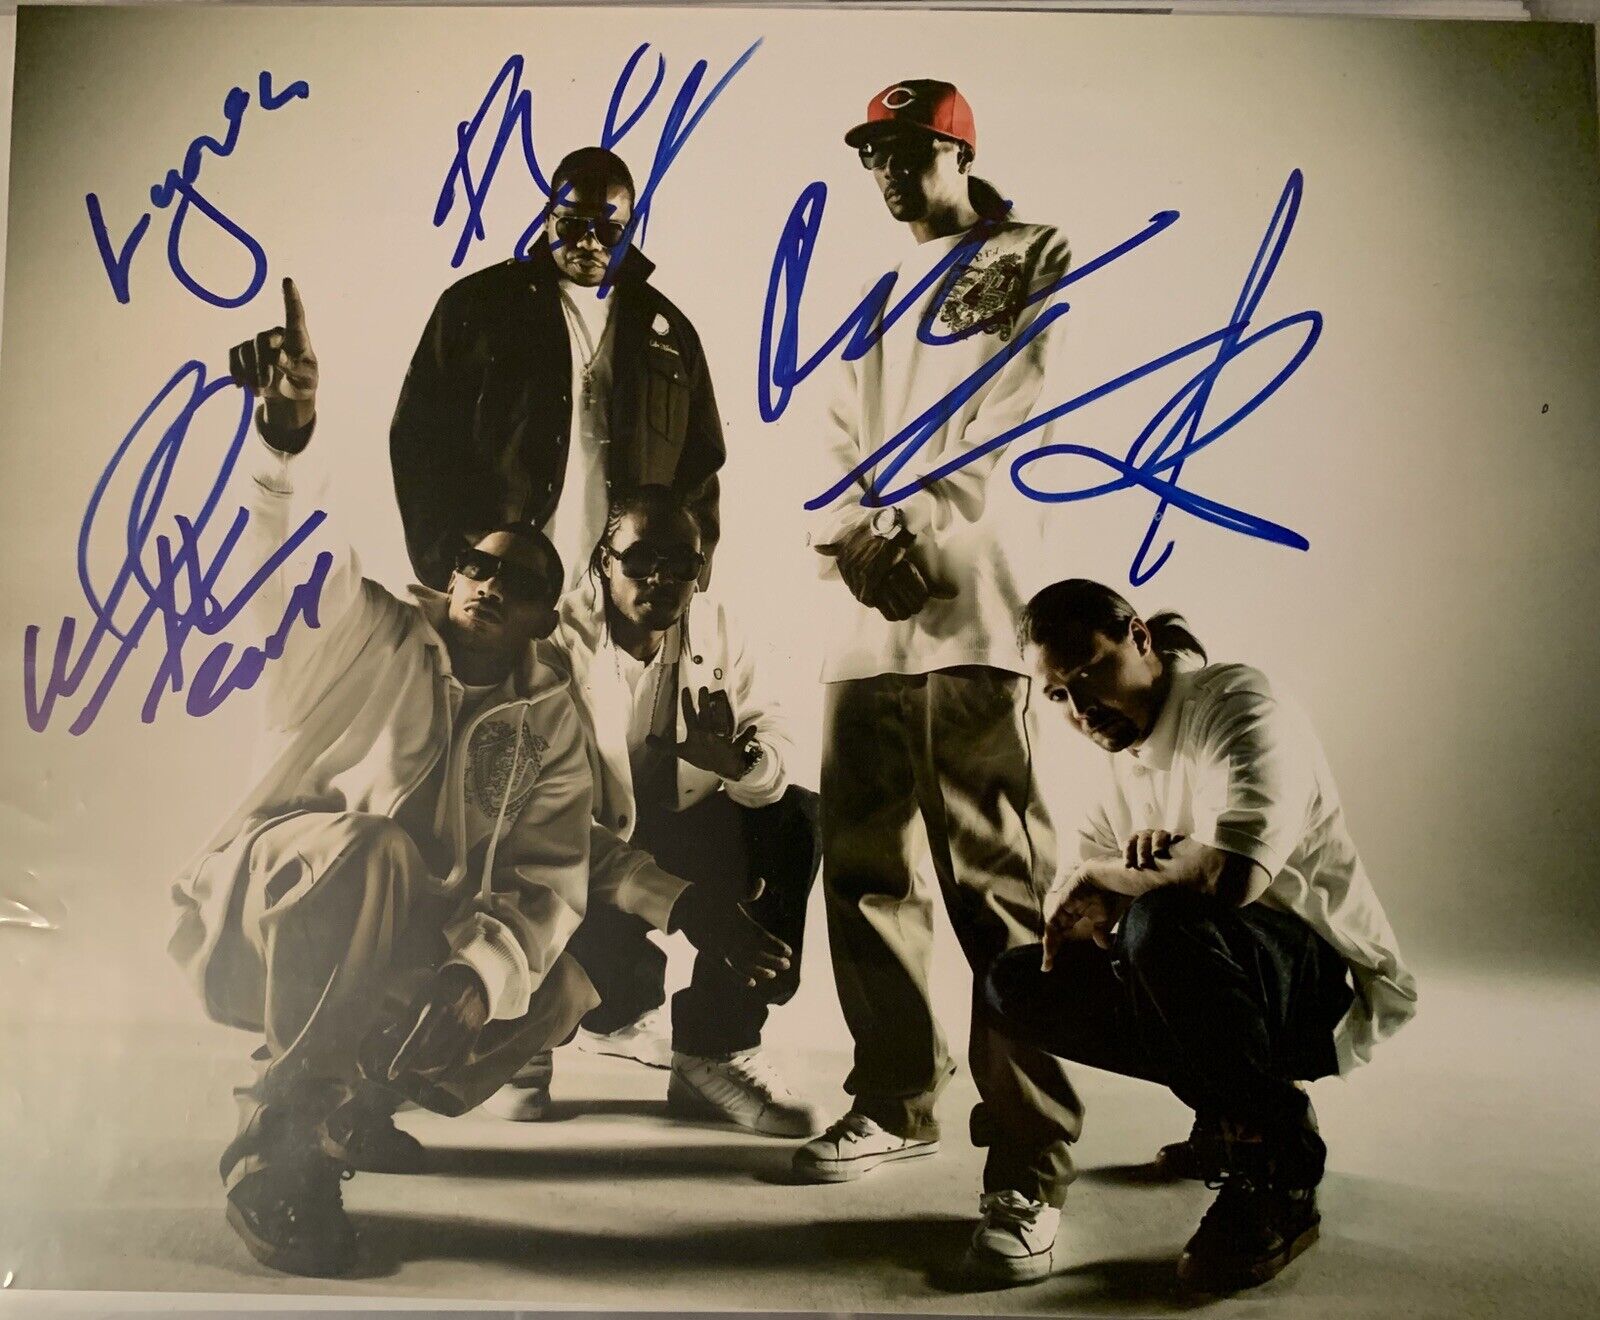 RAP HIP-HOP BONE THUGS N HARMONY SIGNED AUTOGRAPHED 8x10 Photo Poster painting pic all members